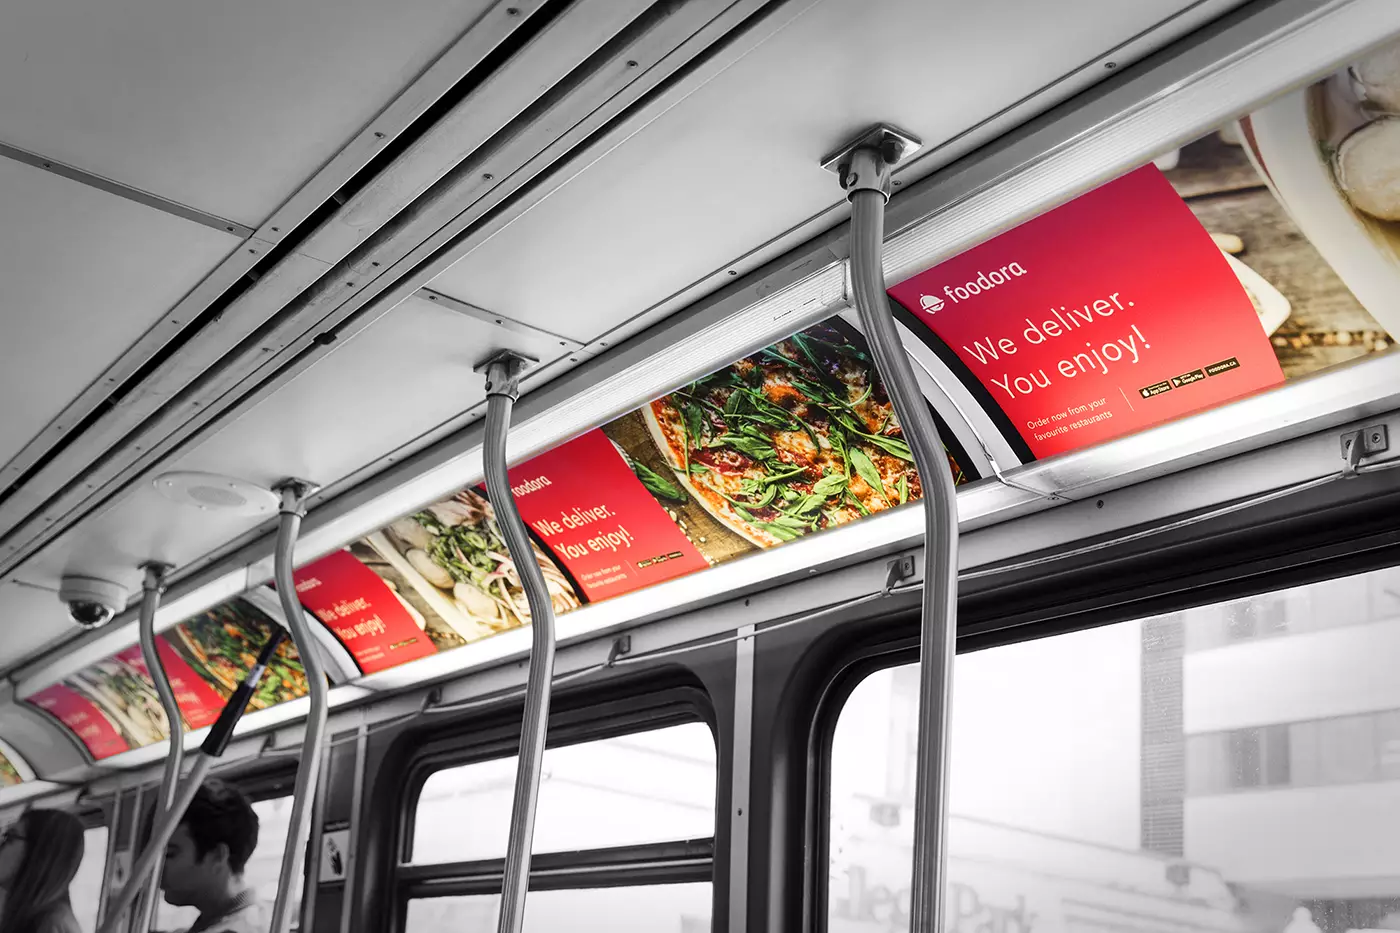 Interior cards on a TTC streetcar are effective ways to promote business to commuters